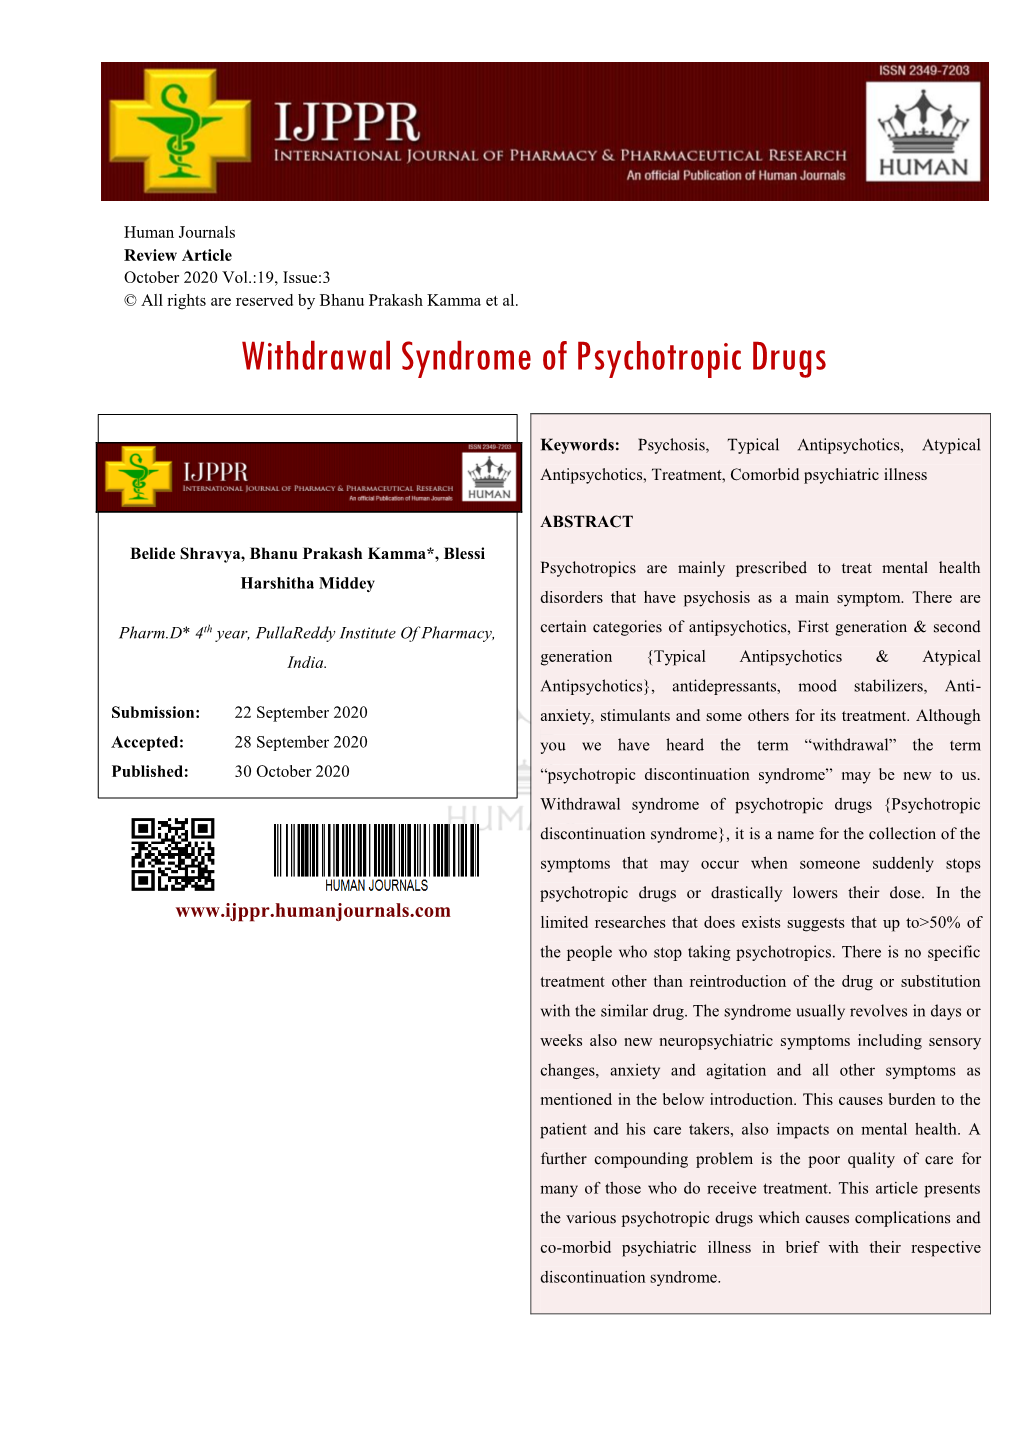 Withdrawal Syndrome of Psychotropic Drugs